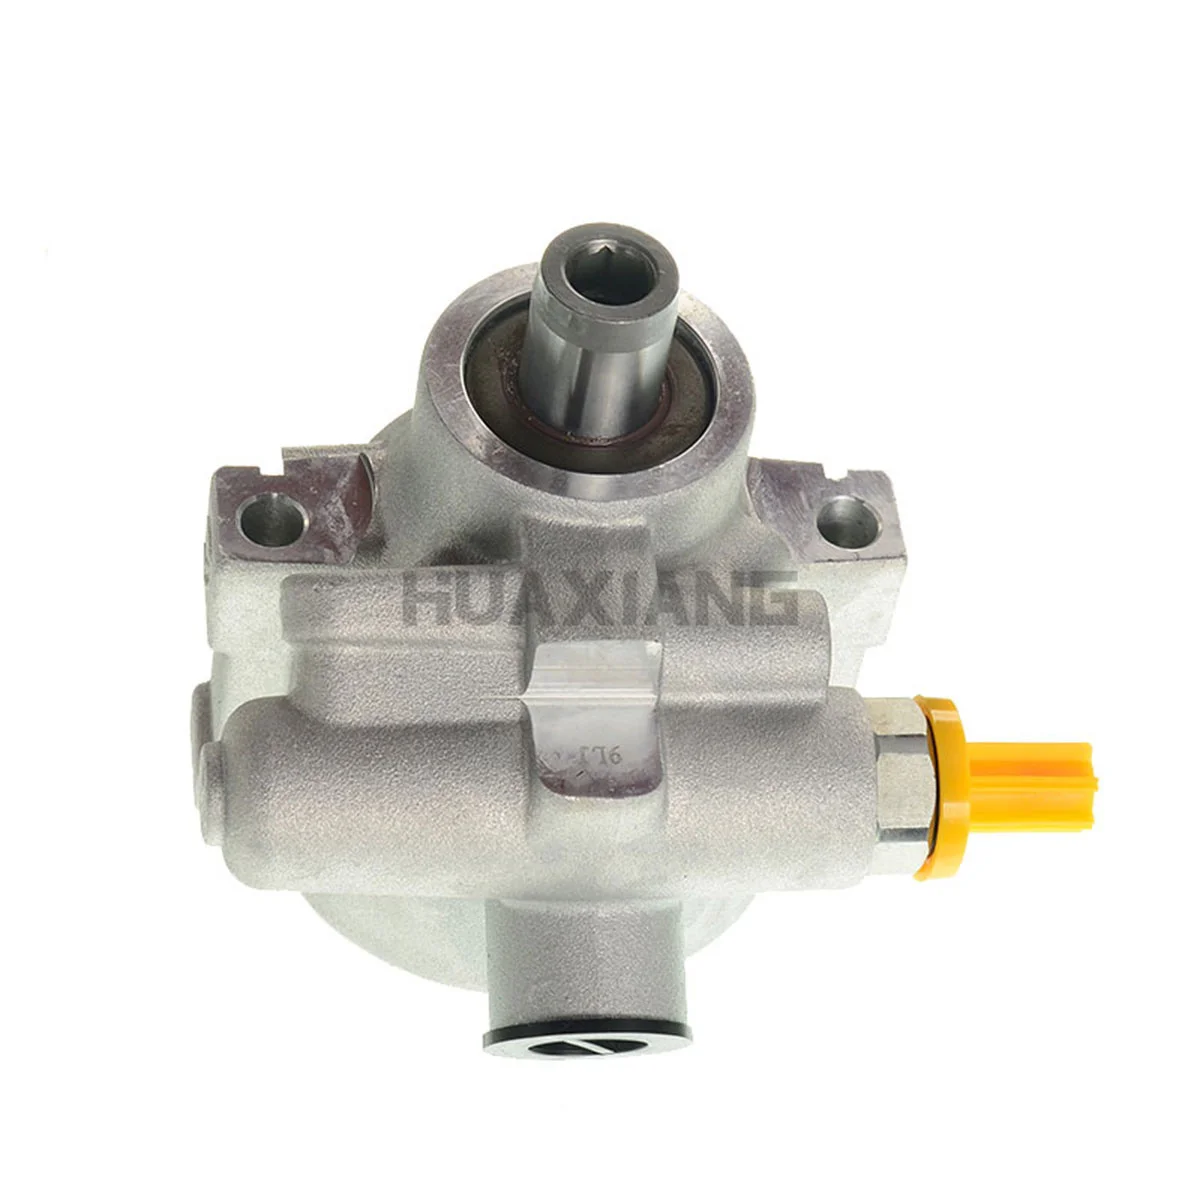 

In-stock CN US CA Power Steering Pump without Pulley for Buick LeSabre Park Avenue Pontiac Bonneville 26086070